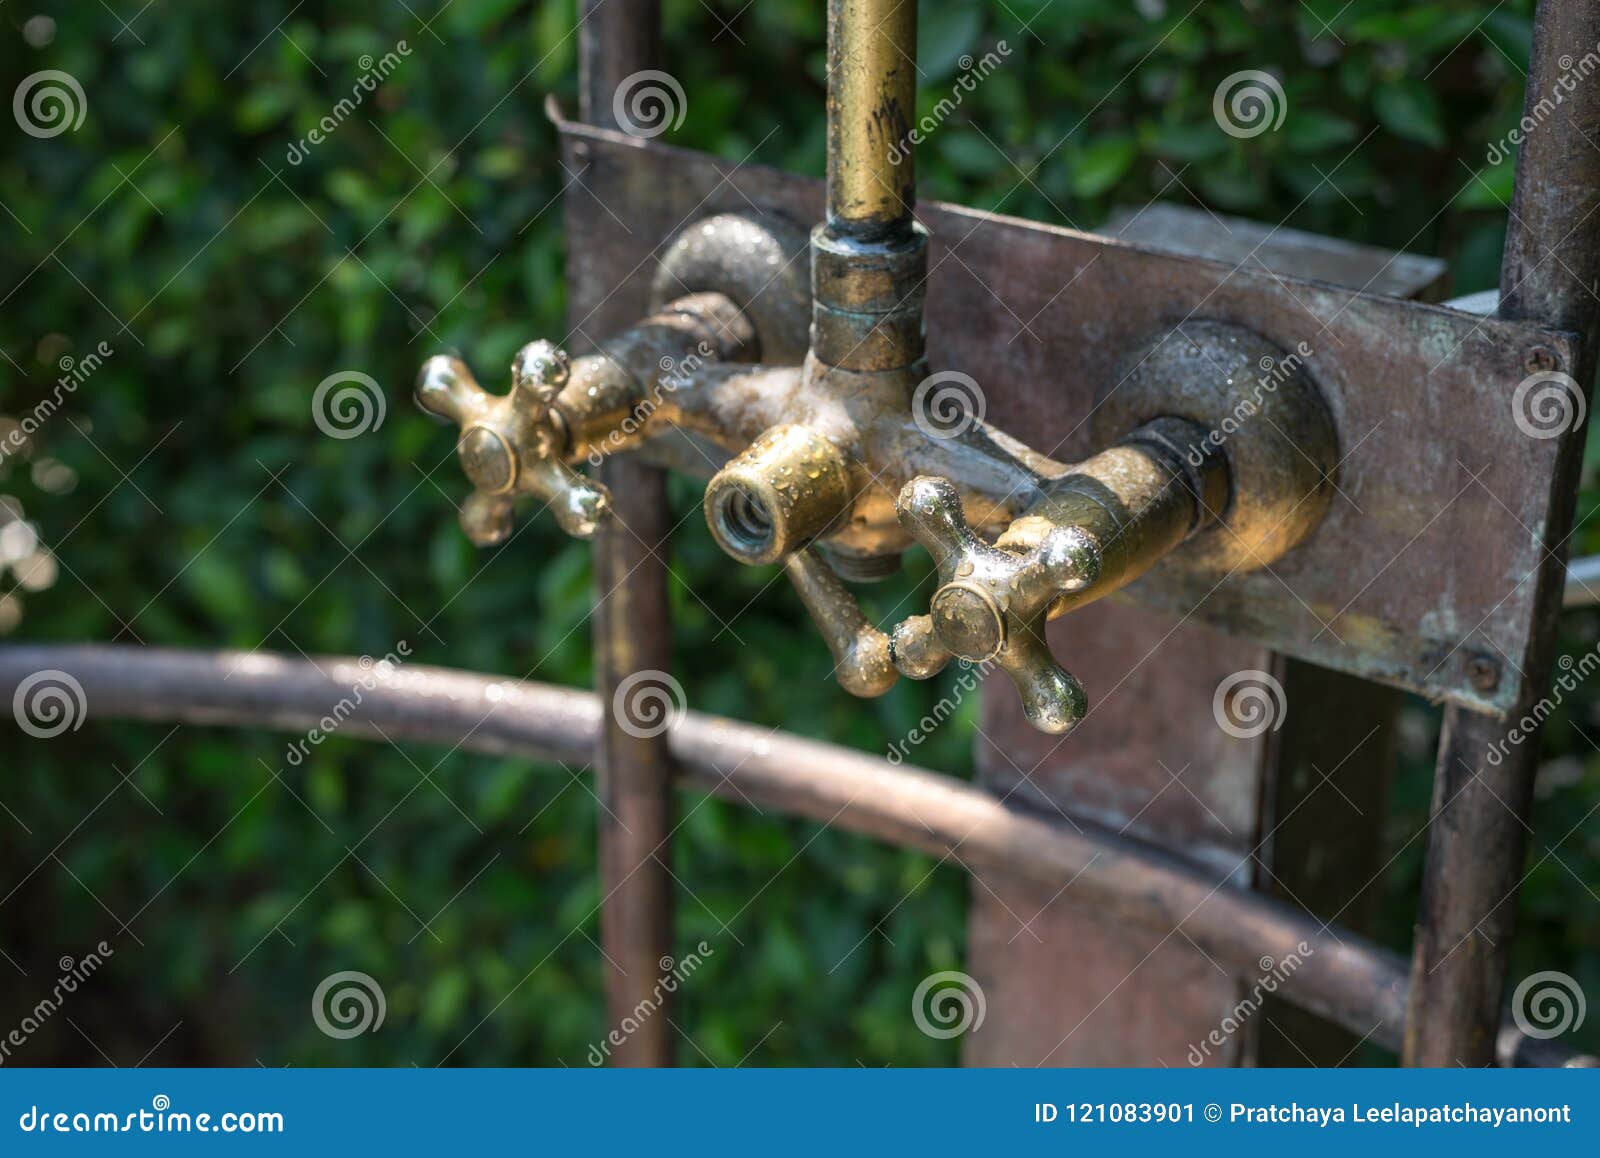 Vintage Bronze Shower Faucet Of Hot And Cold Water Stock Image